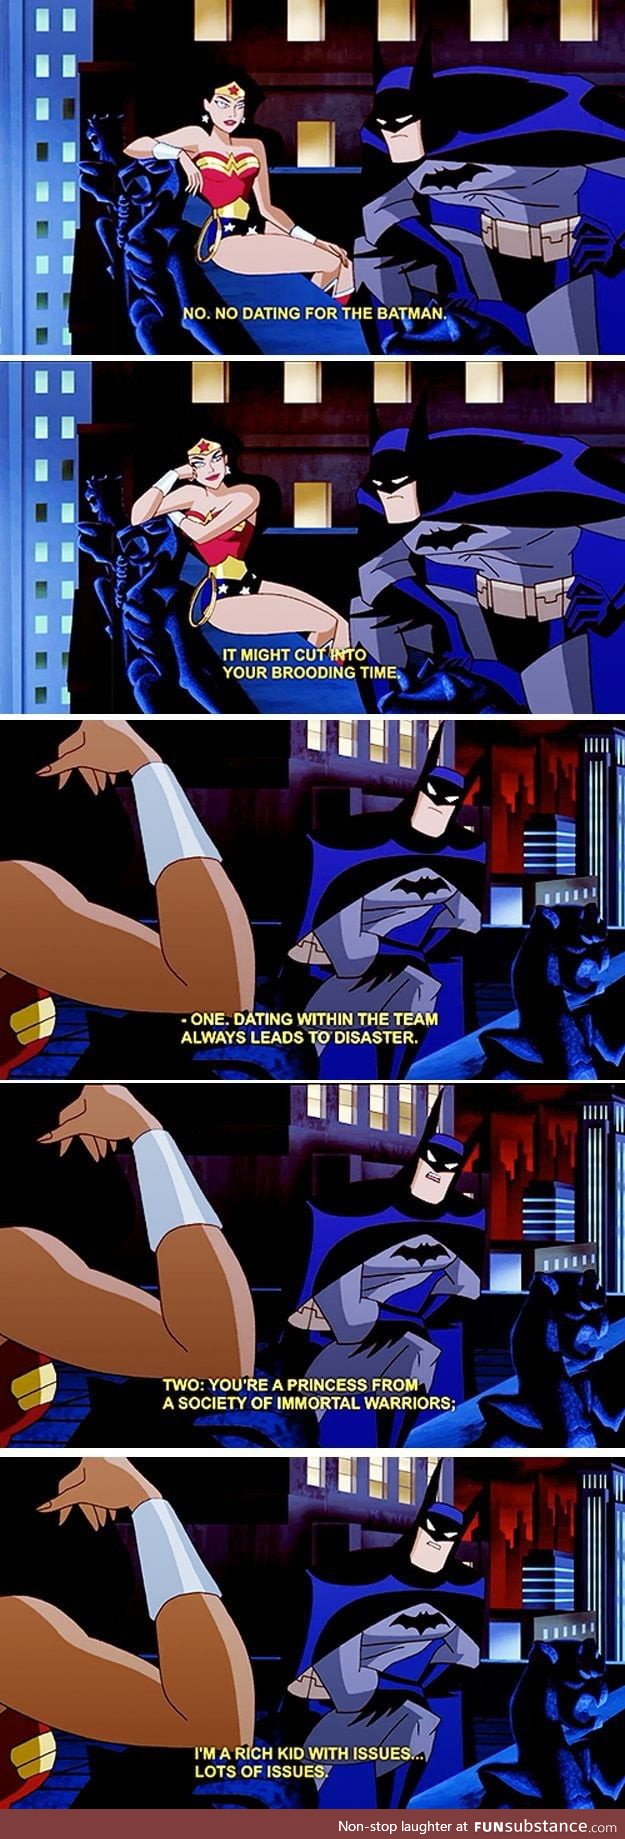 No dating for the Batman